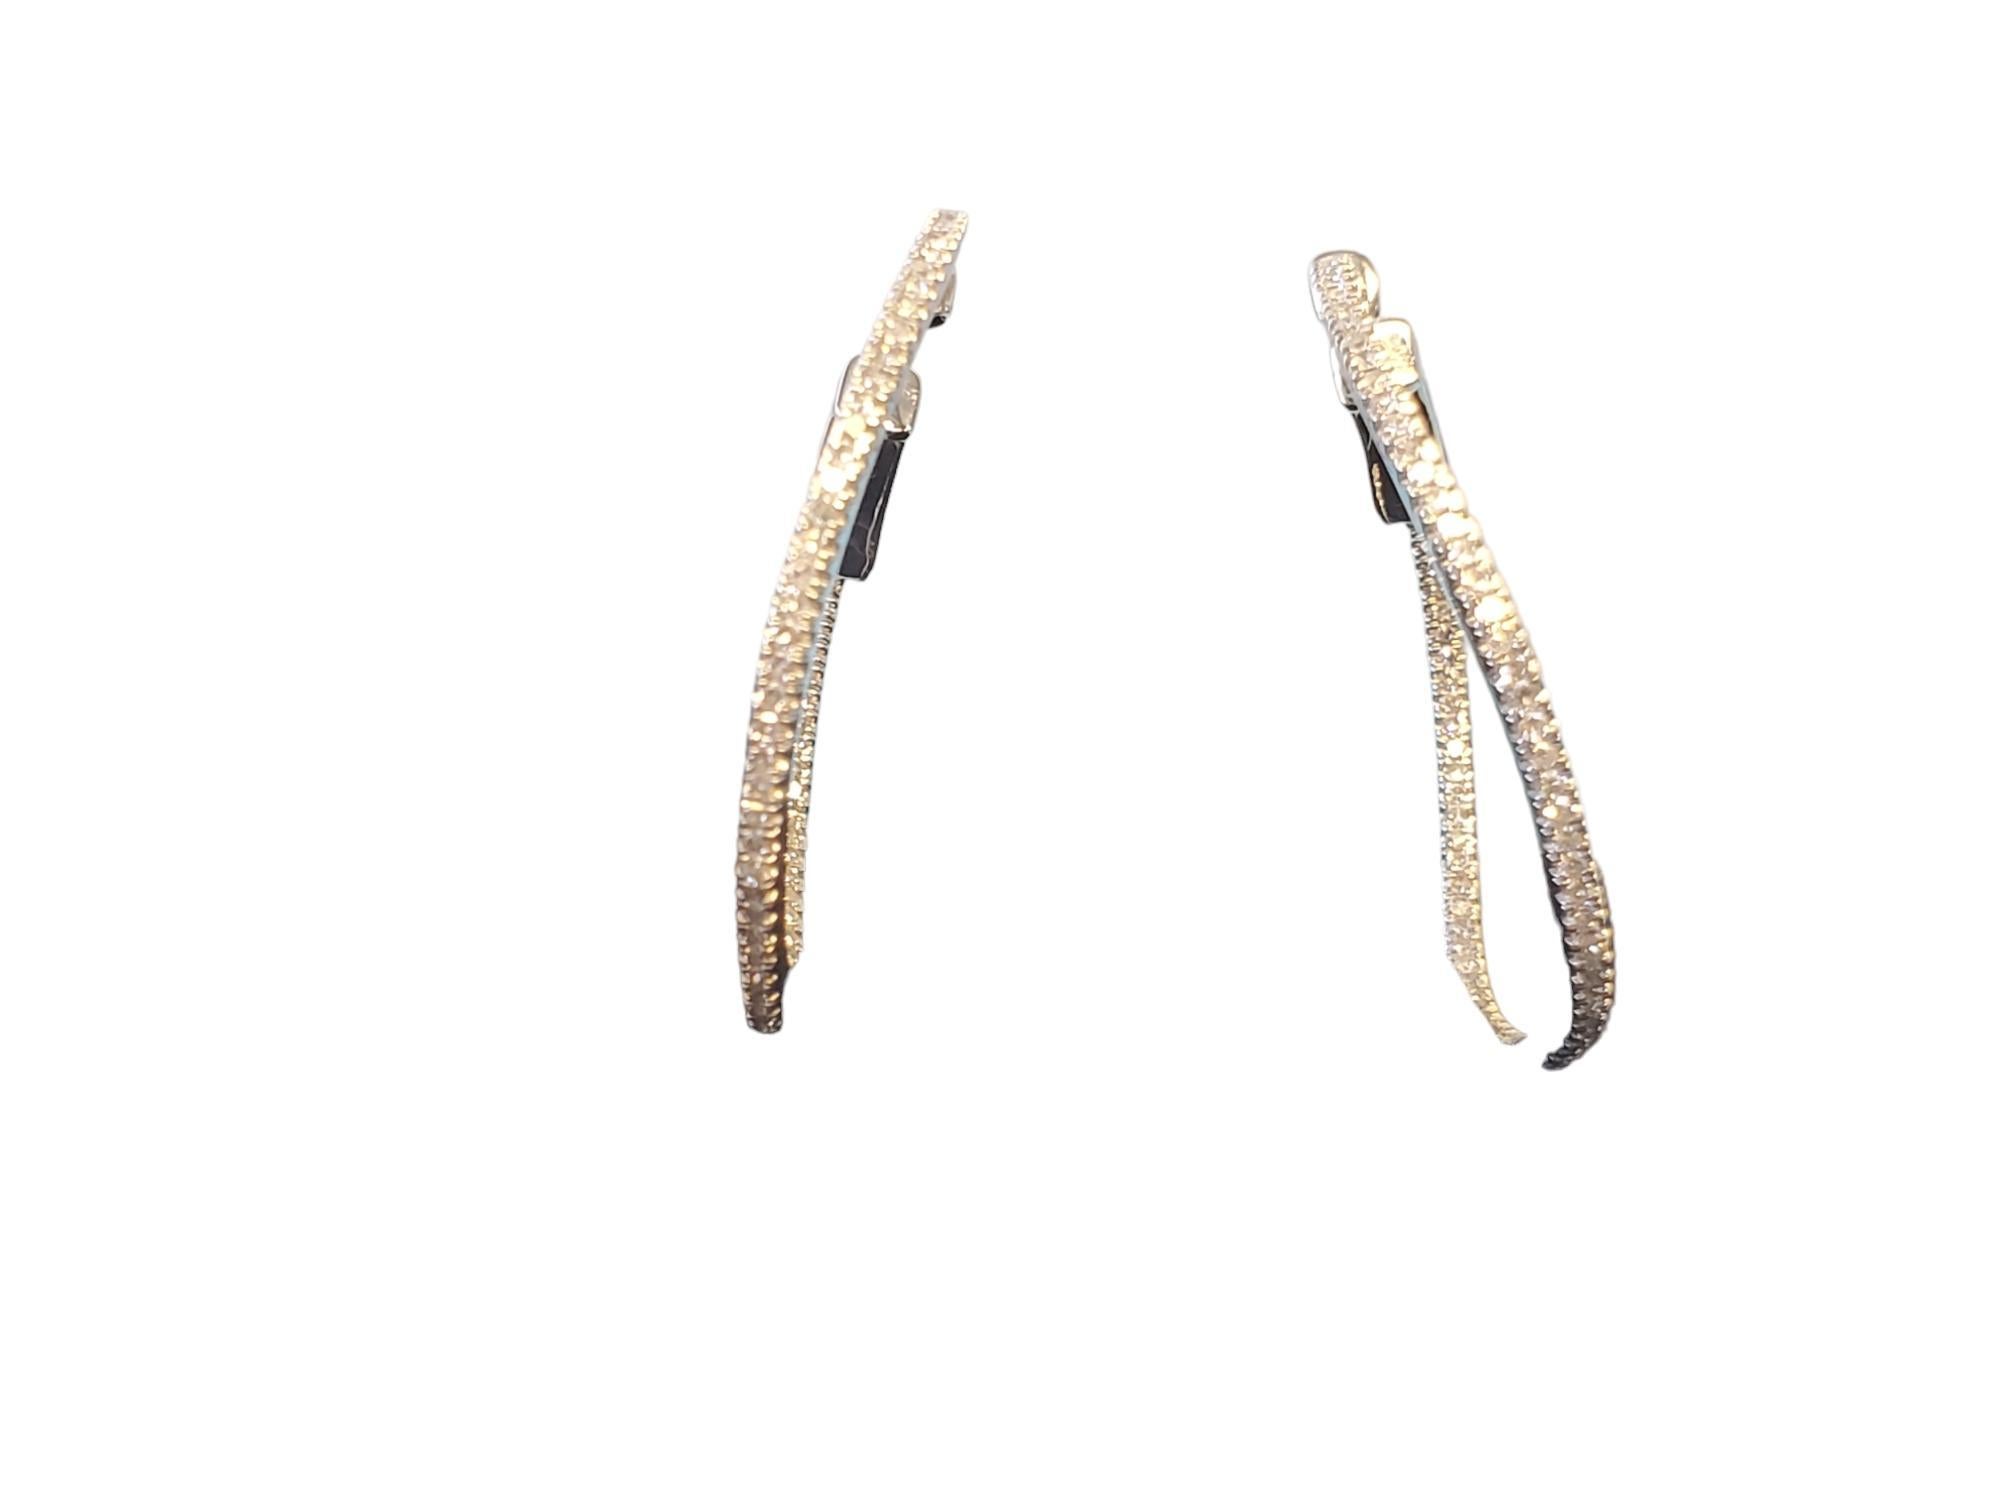 10K Inside Out Diamond Hoop Earrings 

Listed is a really nice pair of diamond hoop earrings in 10k white gold with 1.00tcw round diamonds, The hoops have a pressure release clasp that you press down on to release. The diamonds are H-I SI-I1 quality